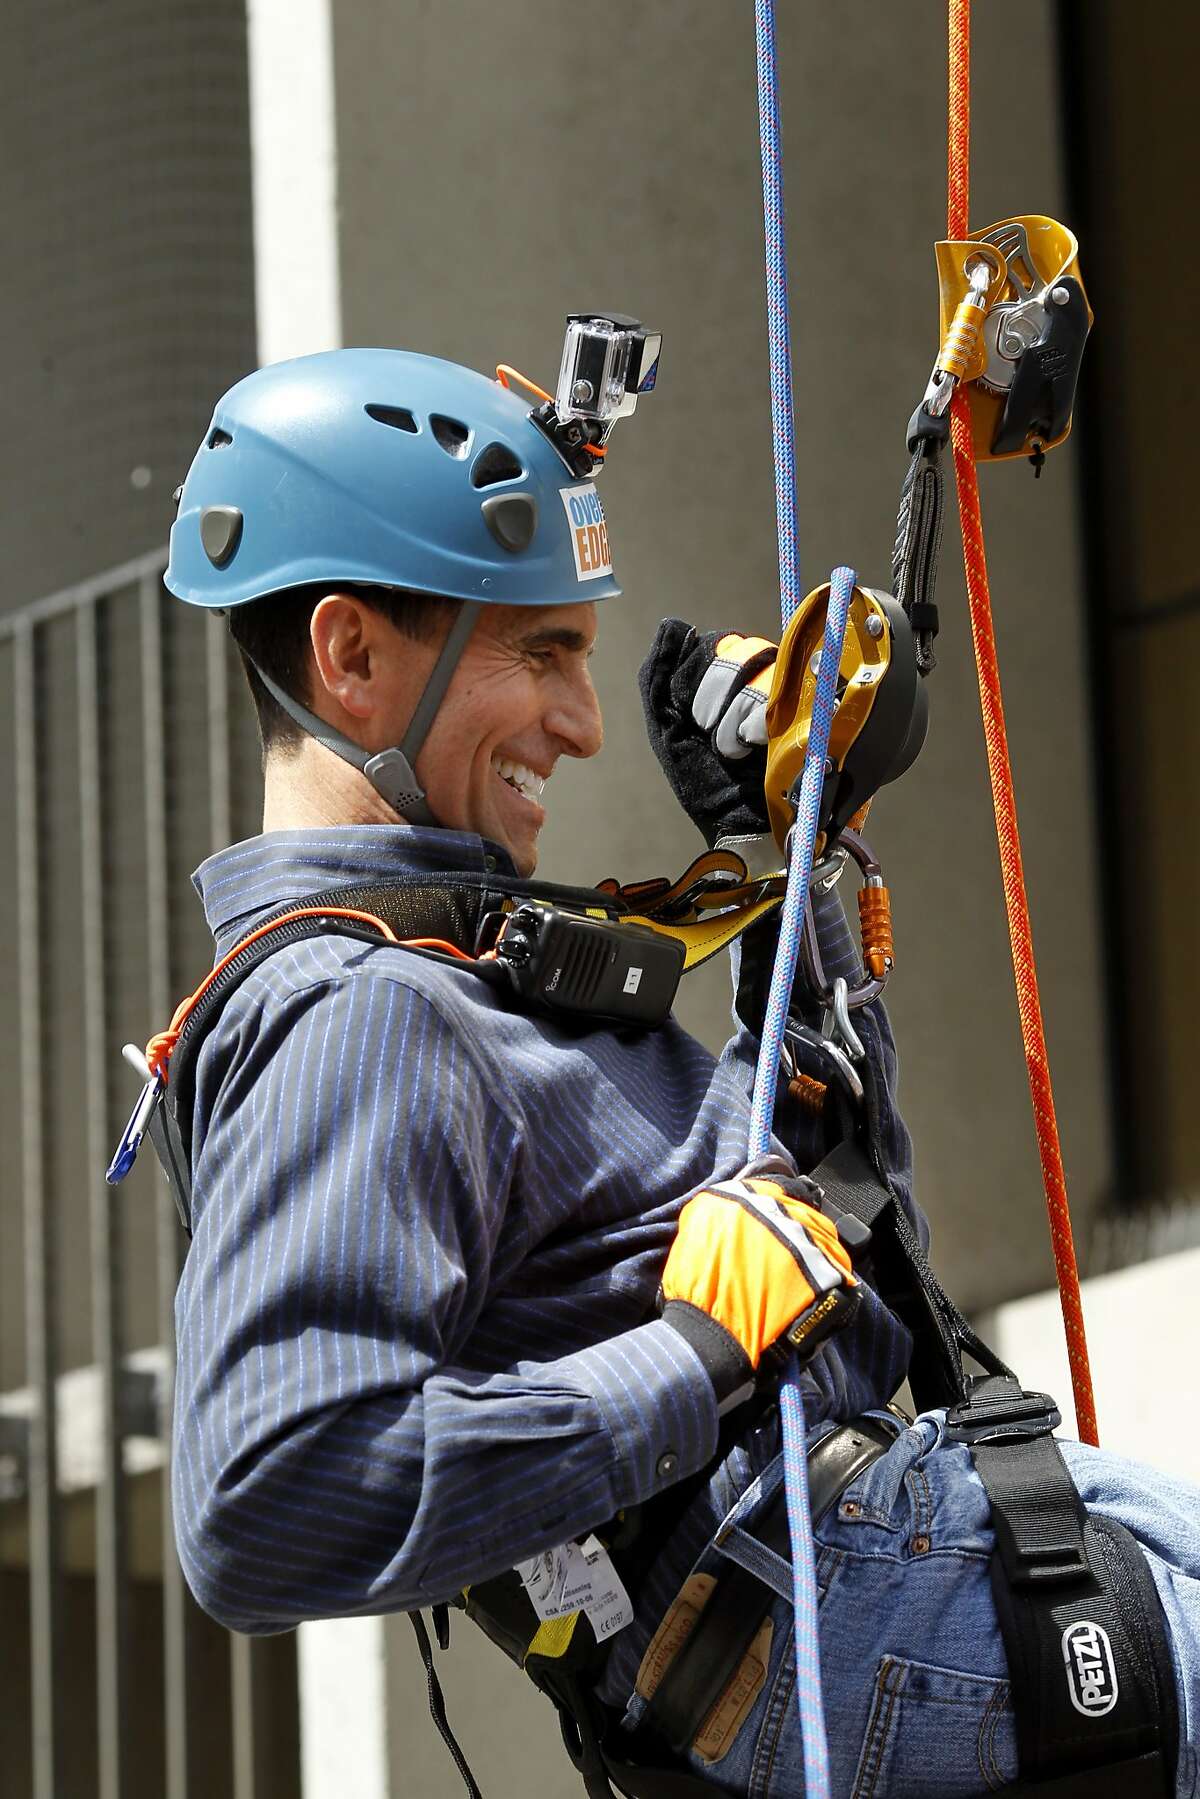 State Senator Mark Leno smiled as he finished the last few feet to the ground Thursday March 27, 2014 in San Francisco, Calif. Dozens of people will rappel free-hanging 230 feet from the roof of the Hyatt Regency to benefit Outward Bound and expand outdoor learning opportunities for low income students throughout the state.